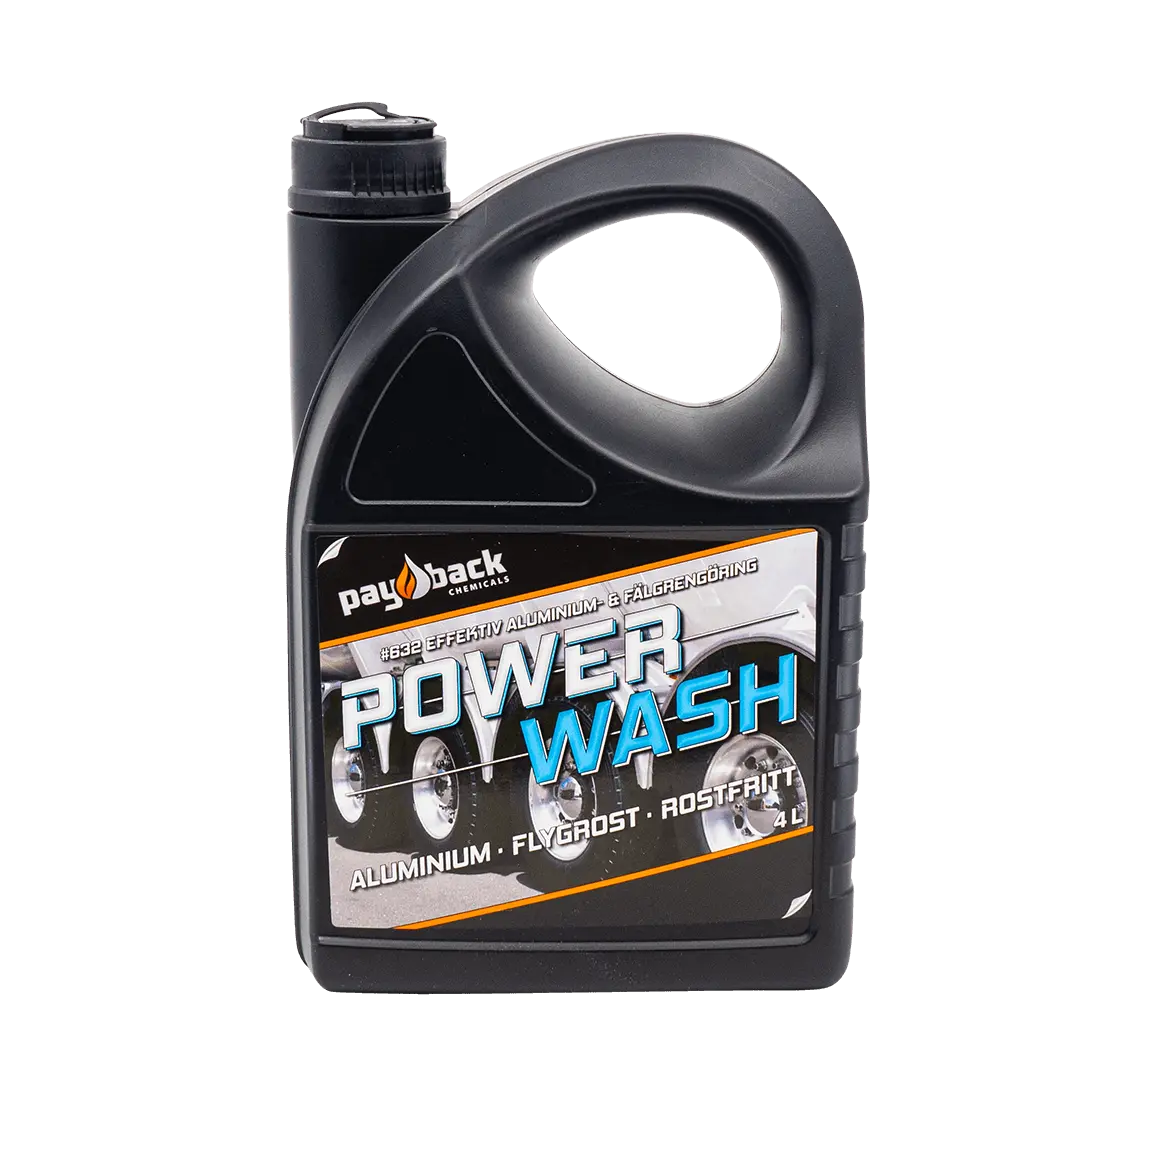 PayBack Power Wash 4L